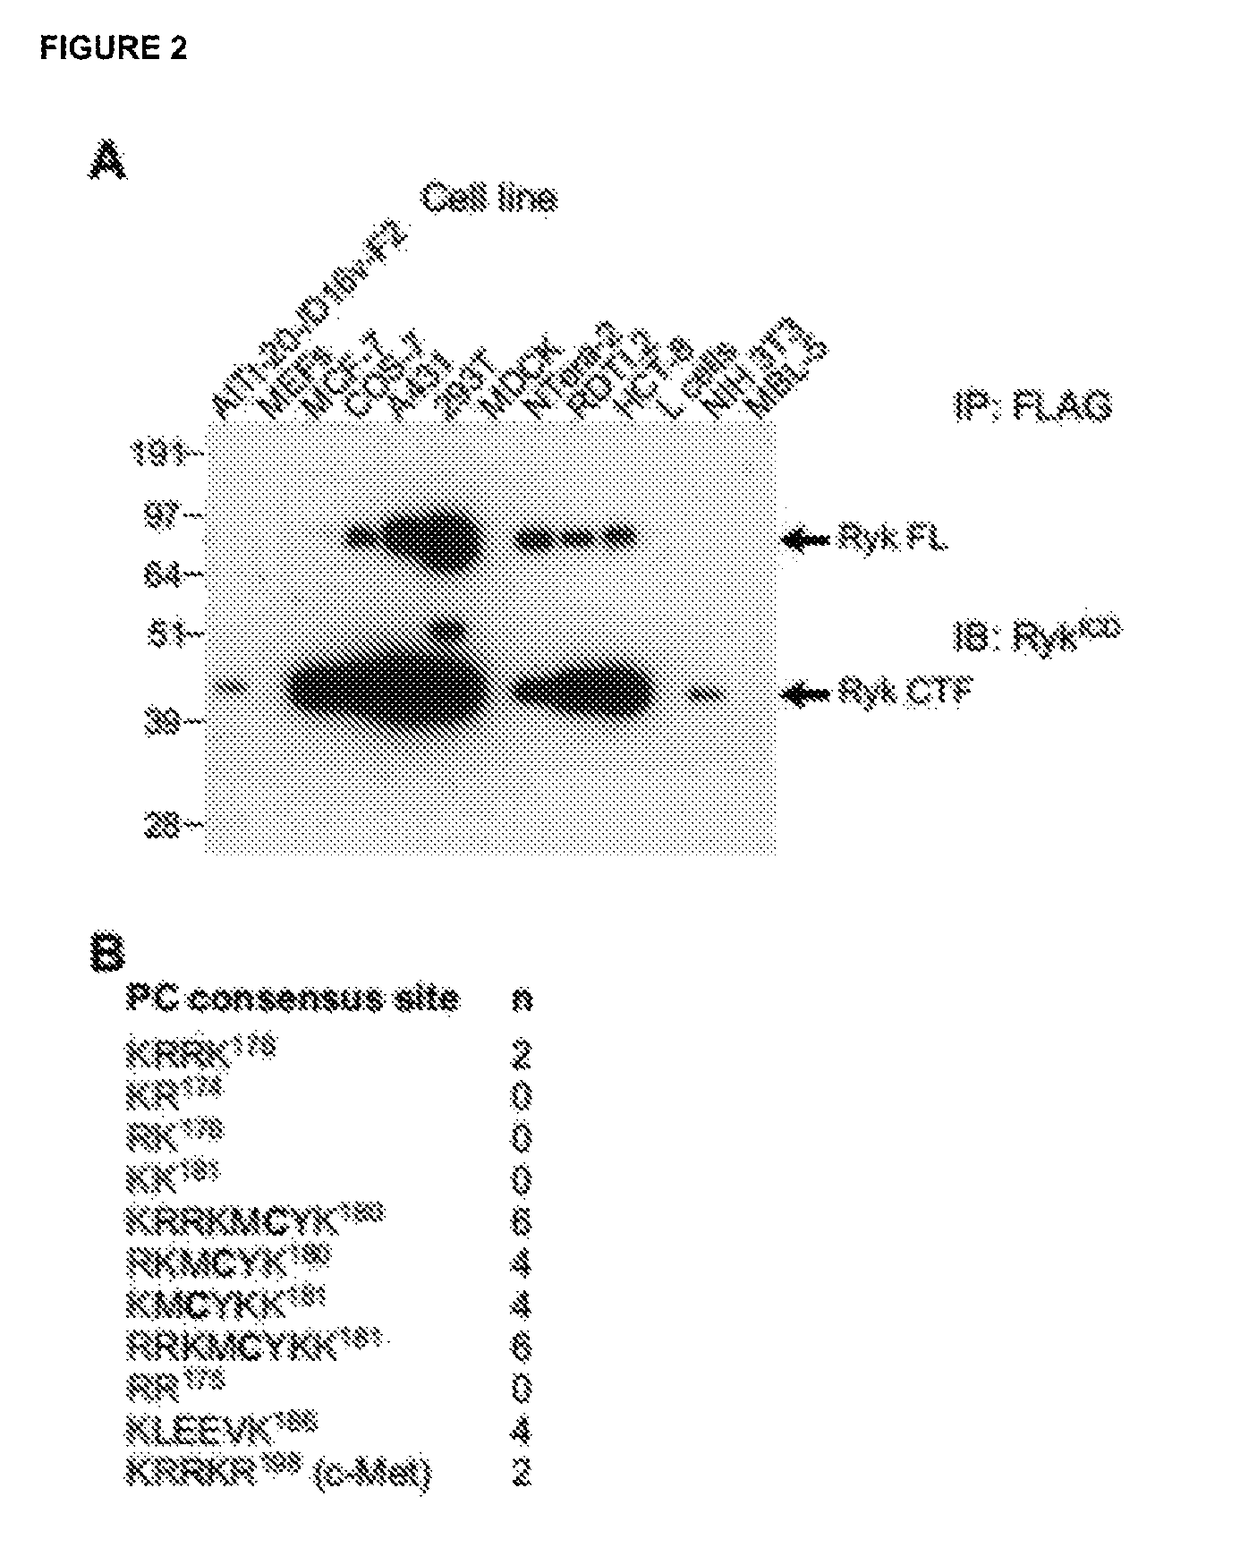 Antibodies against human RYK and uses therefor